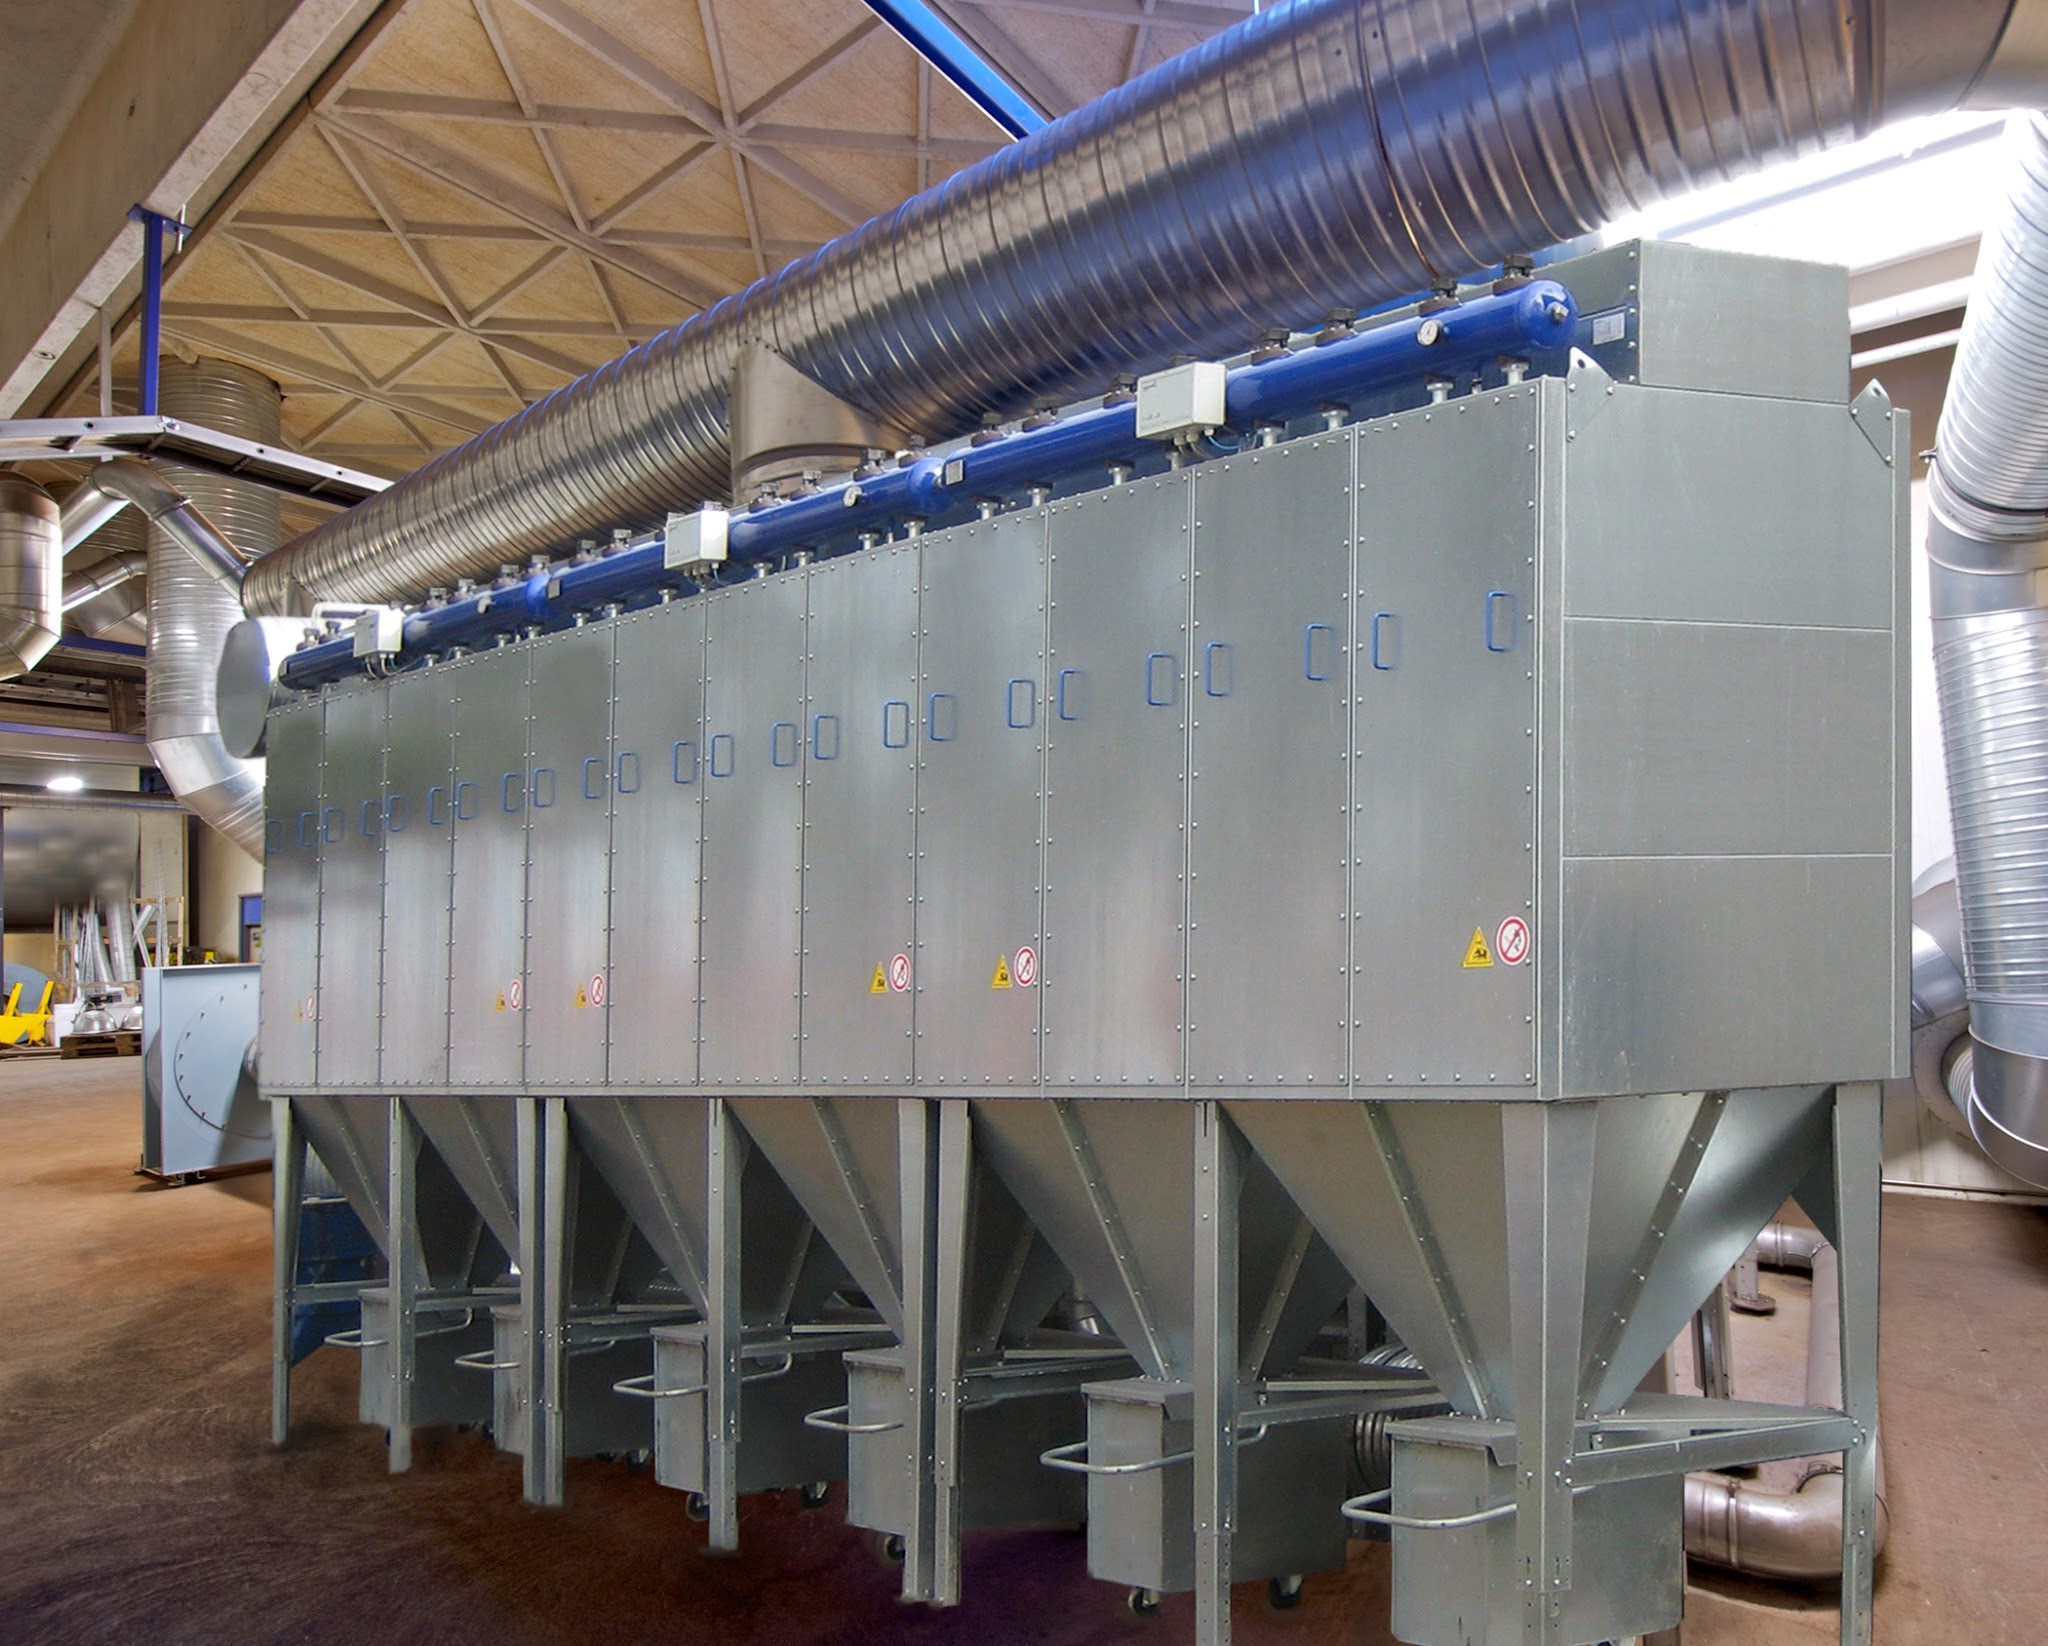 fmc-dust-collector-thermal-cutting-application_23080165659_o.jpg